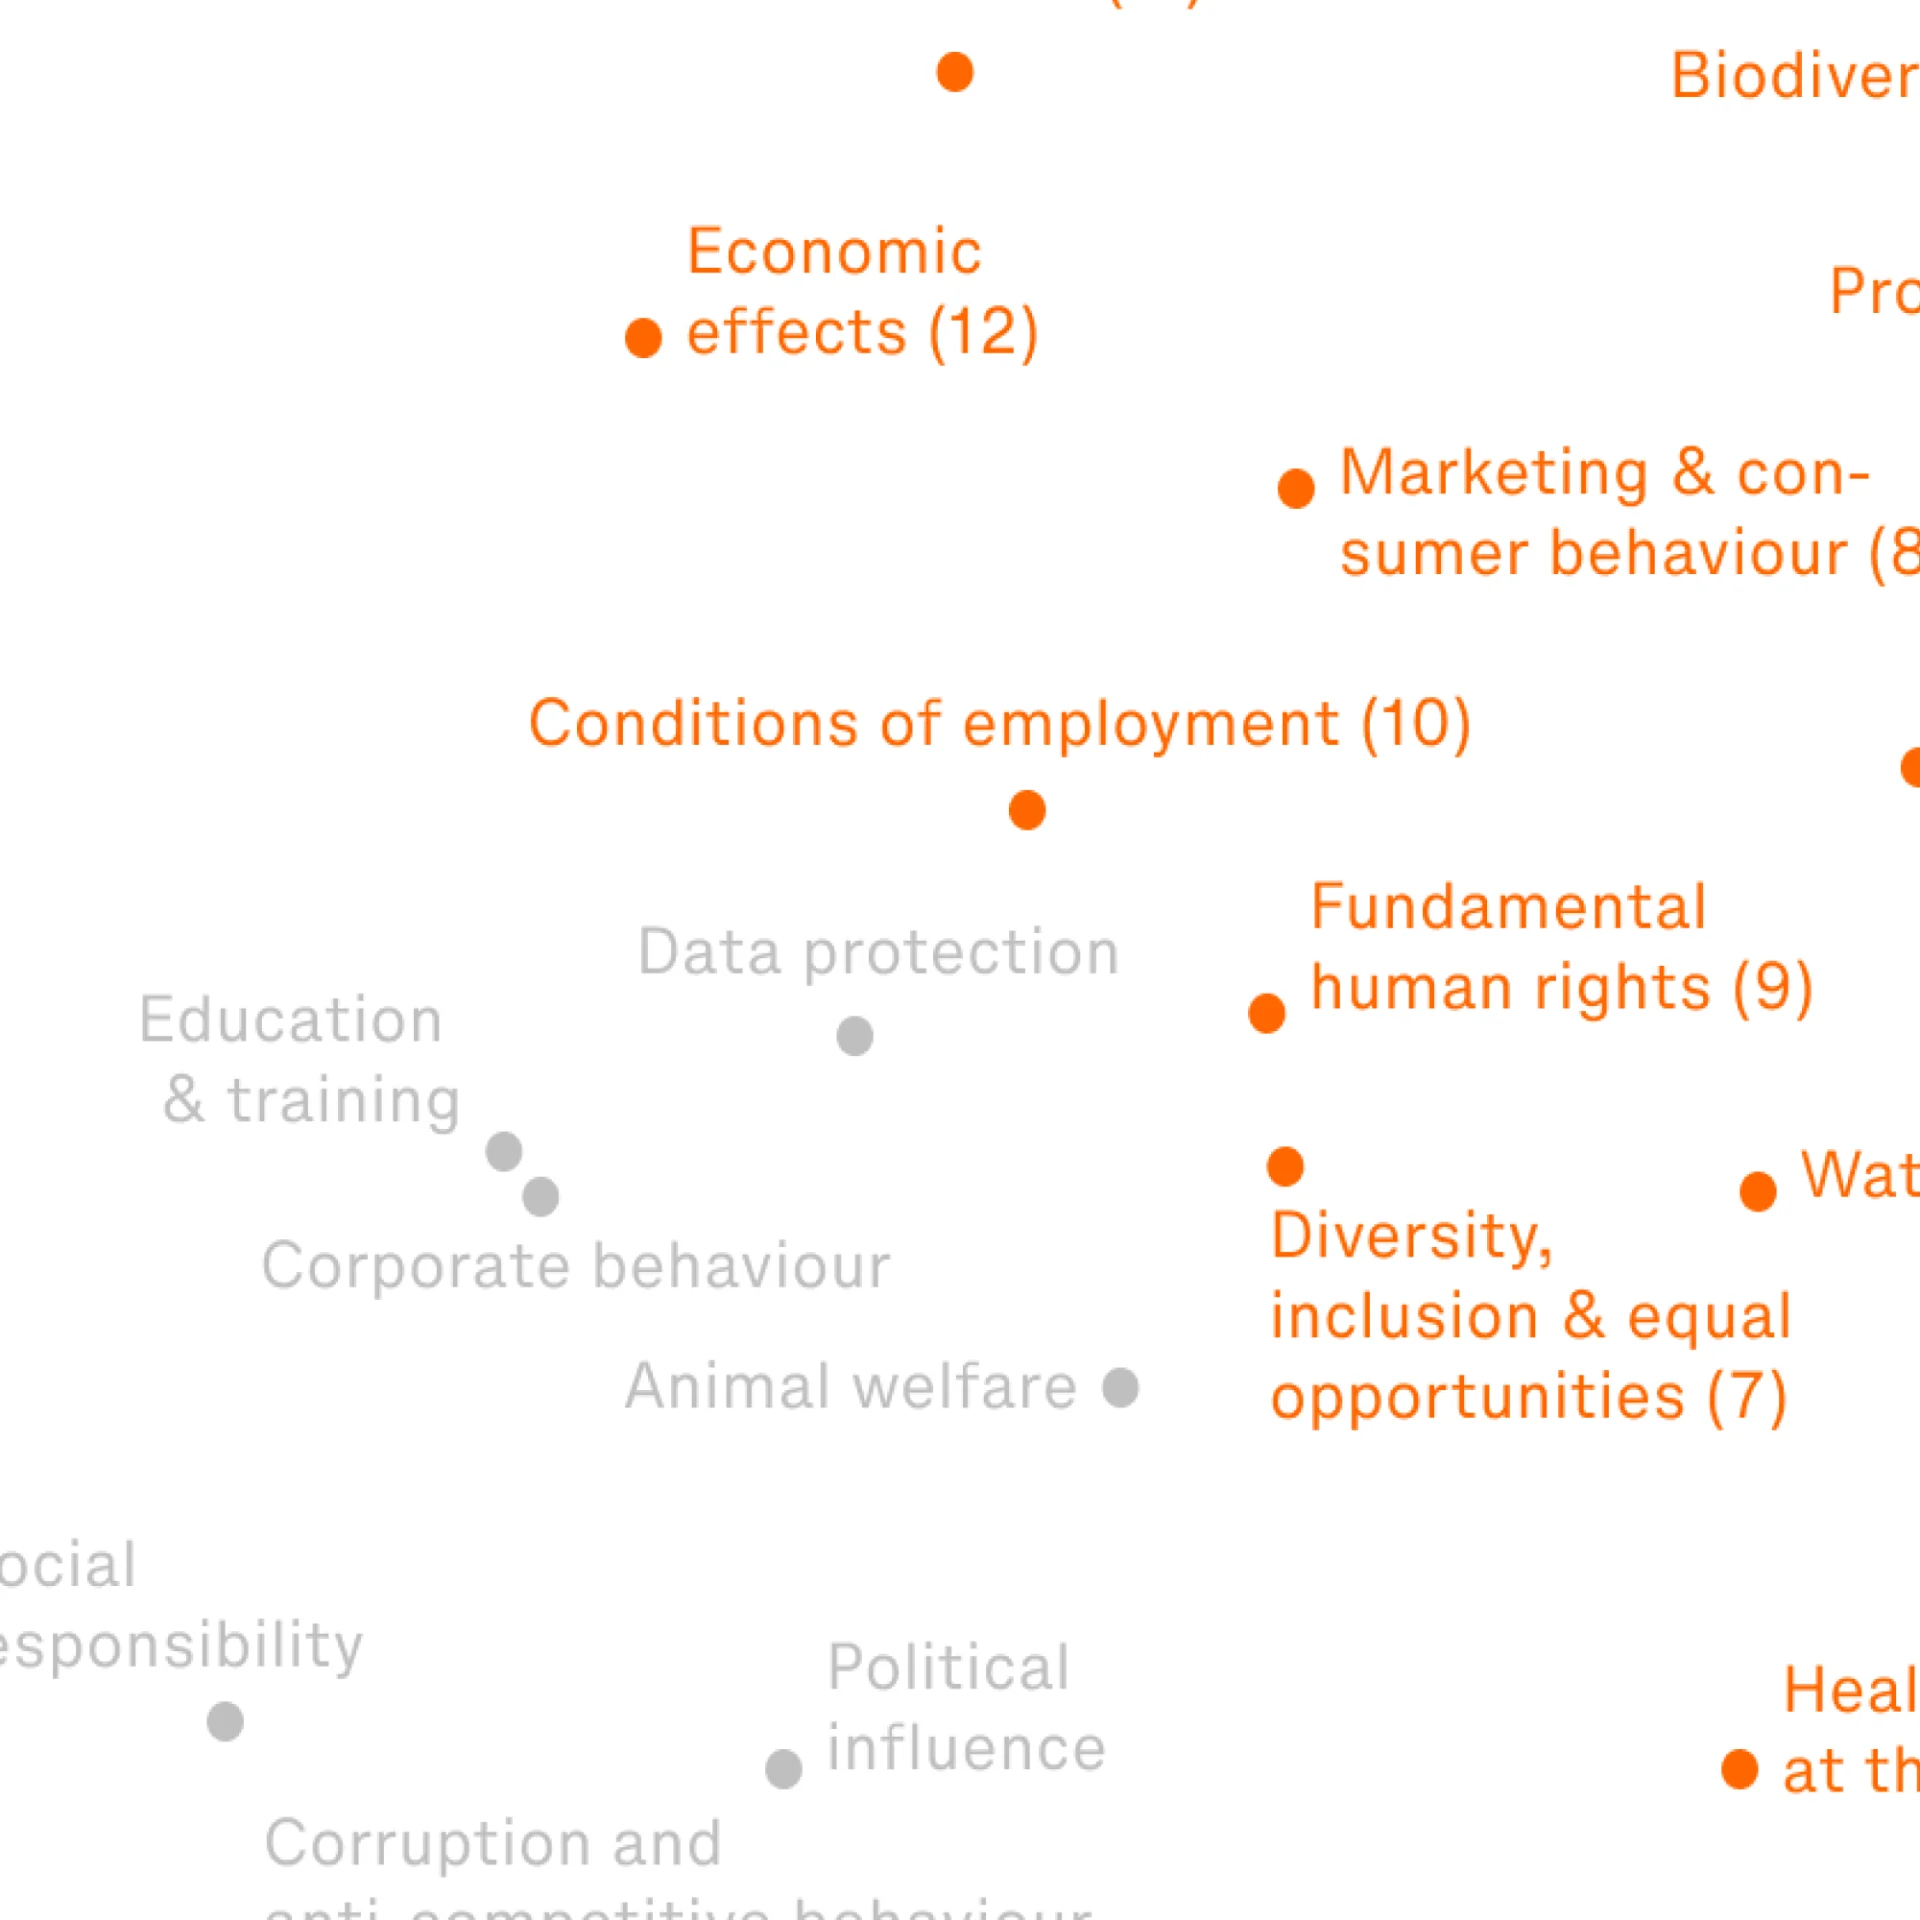 Excerpt from the «Materiality analysis» infographic